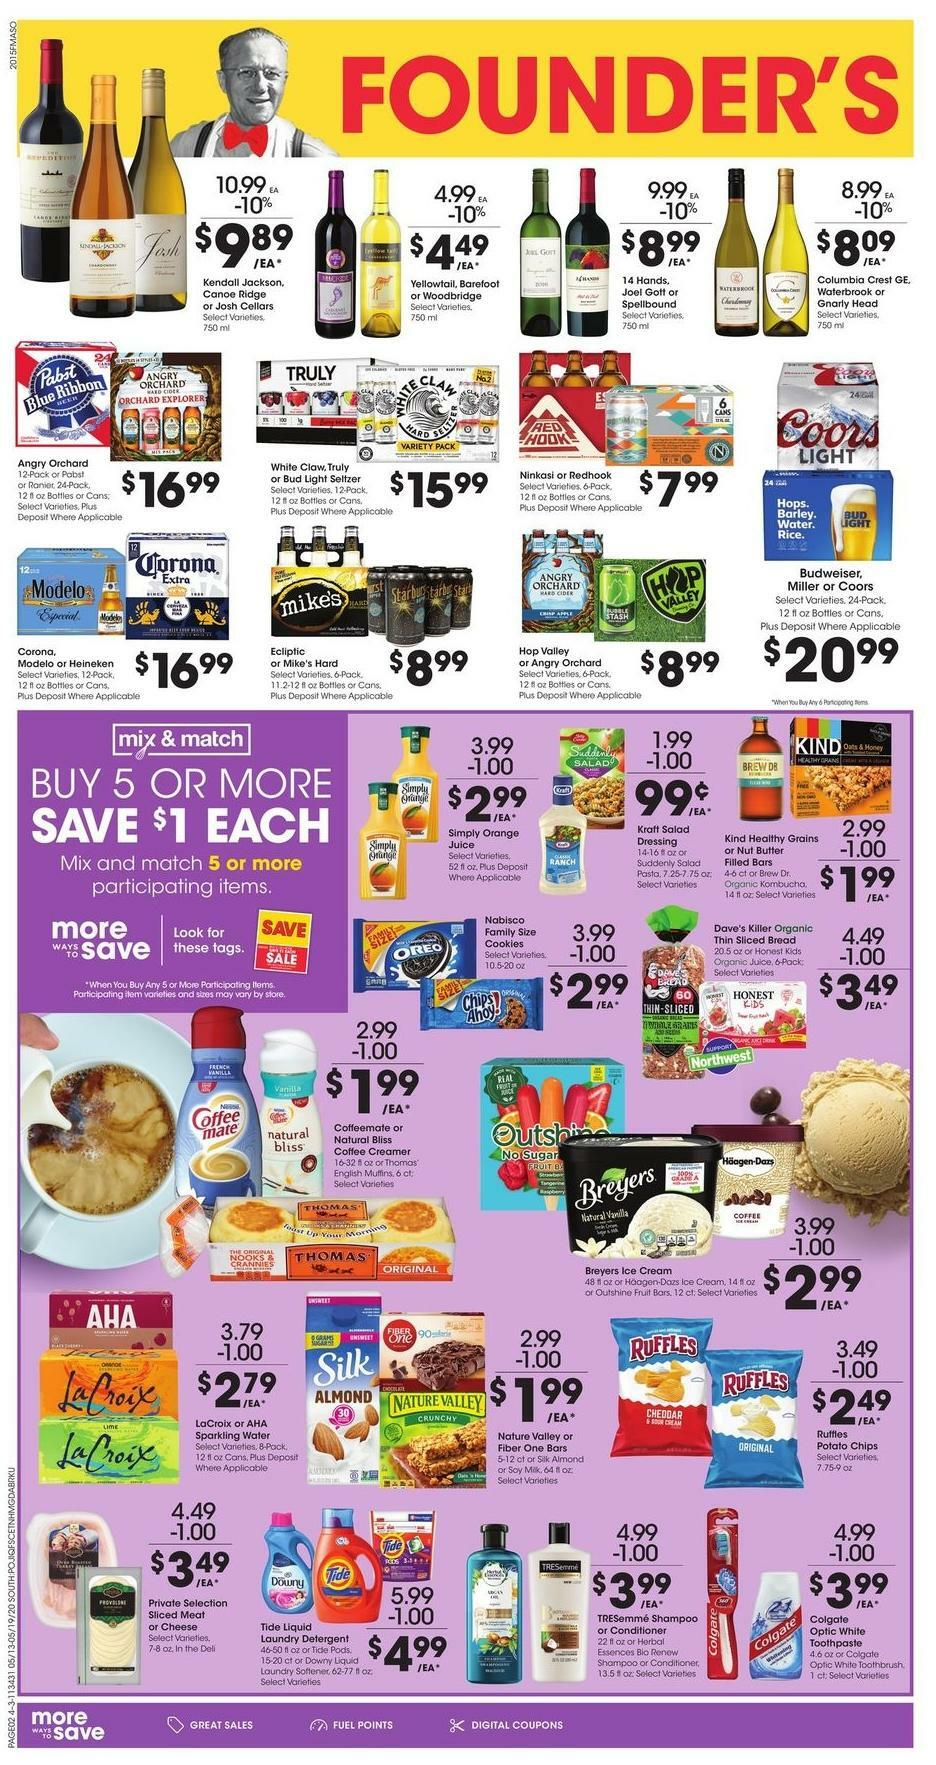 Fred Meyer Founder's Day Sale Weekly Ad & Specials from May 13 Page 2